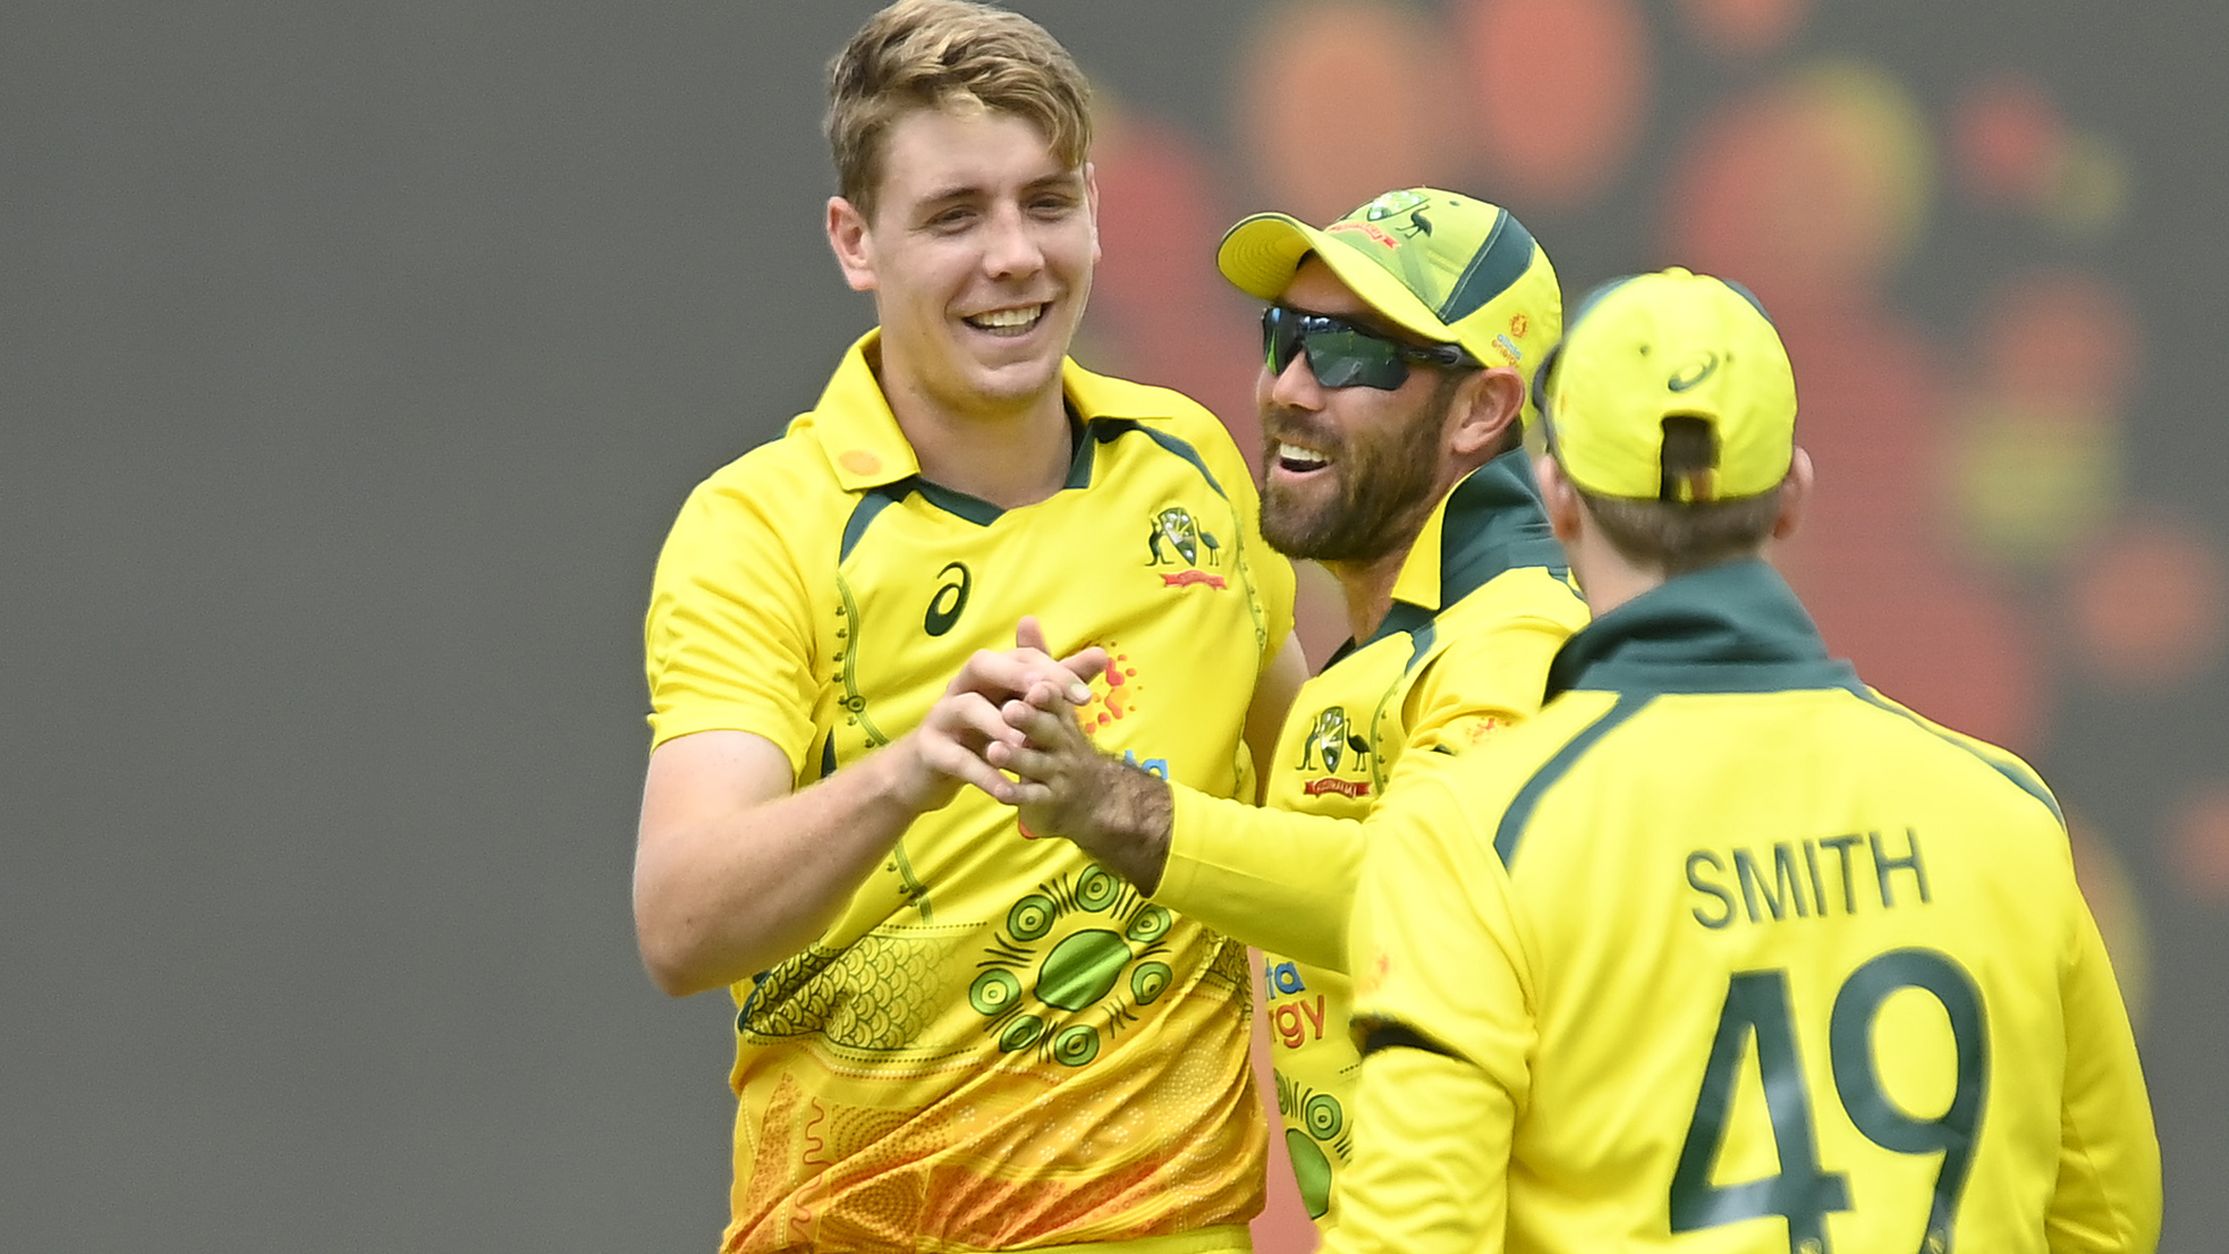 Aussie young gun rushed into Twenty20 World Cup squad after freak injury